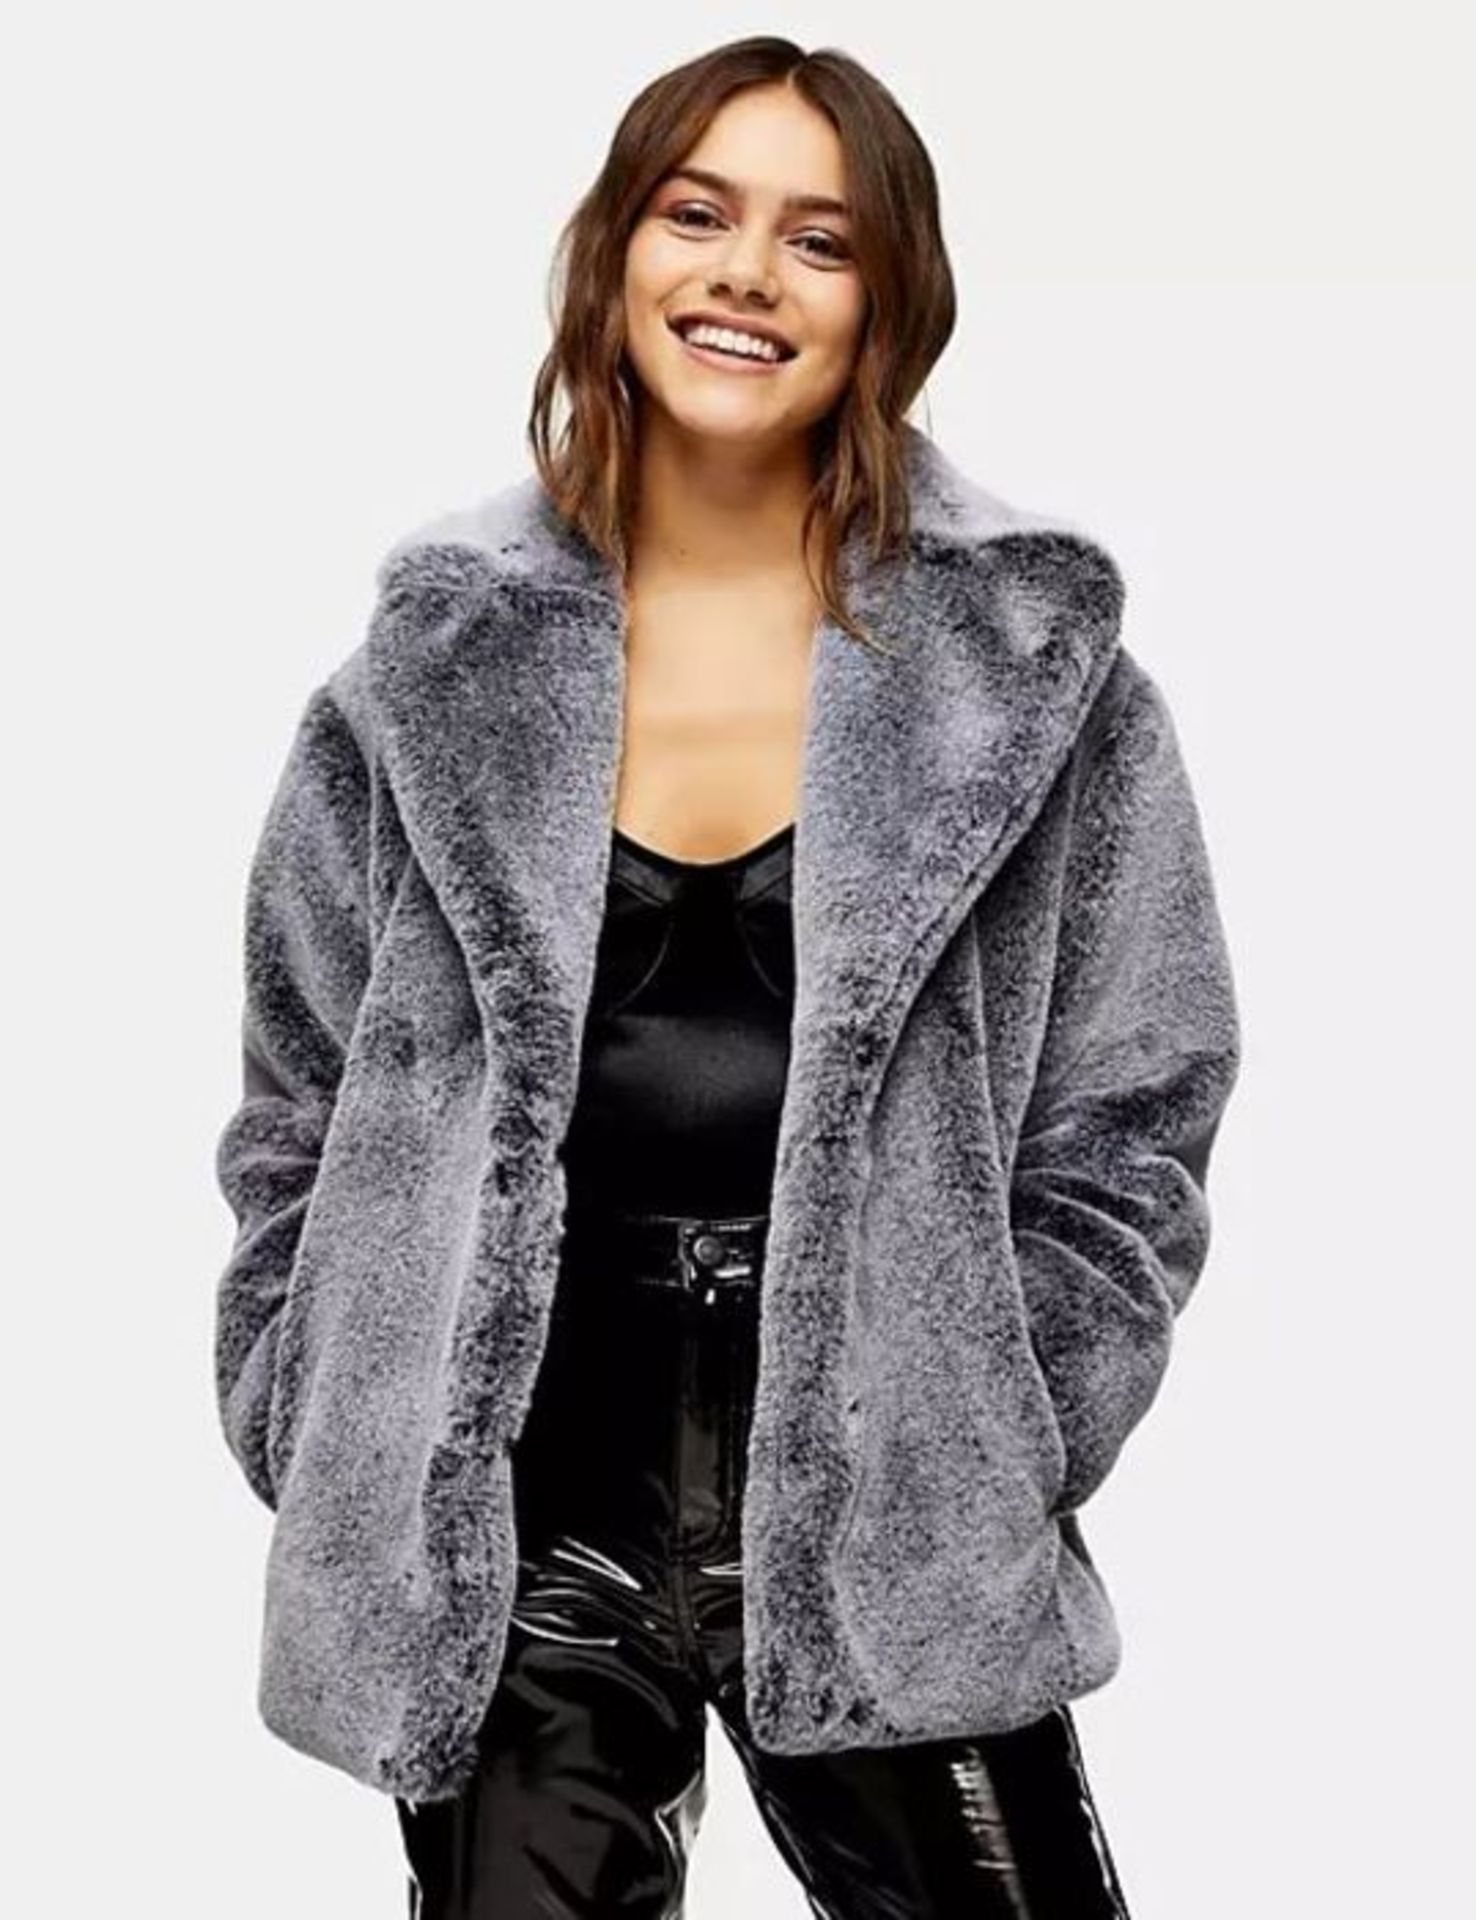 1 X TOPSHOP TWO TONE FAUX FUR COAT - GREY / SIZE: 12 / RRP £70.00 / BRAND NEW WITH TAGS